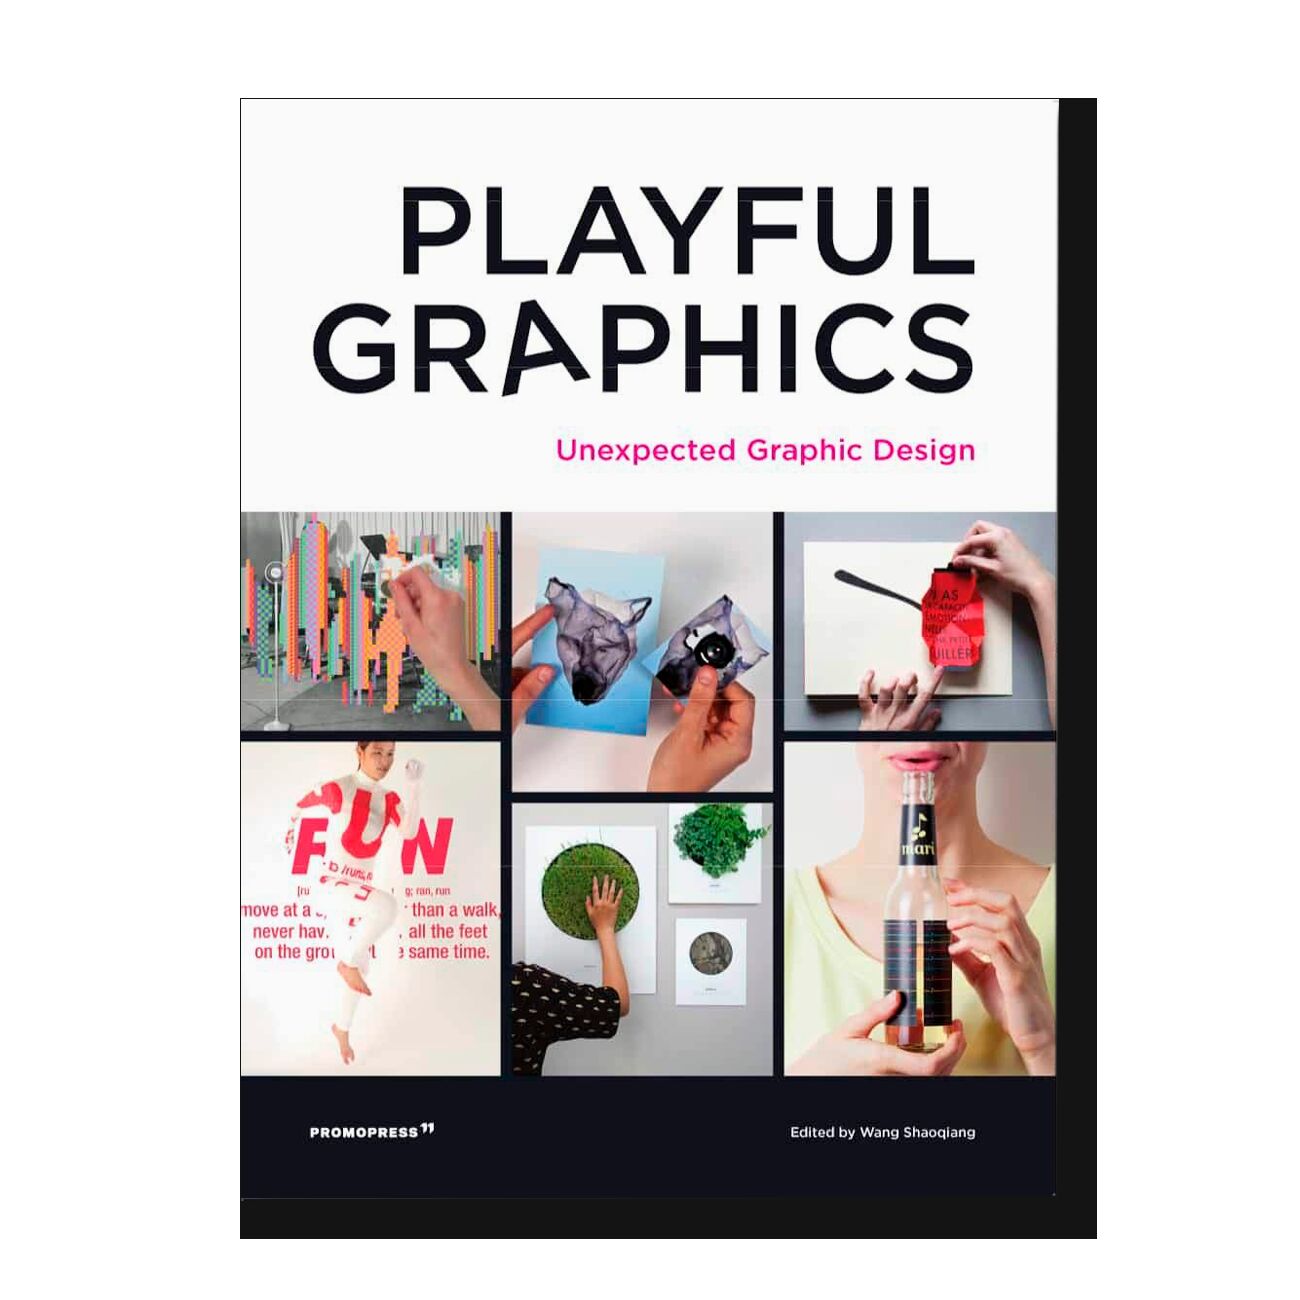 Playful graphics: Unexpected Graphic Design